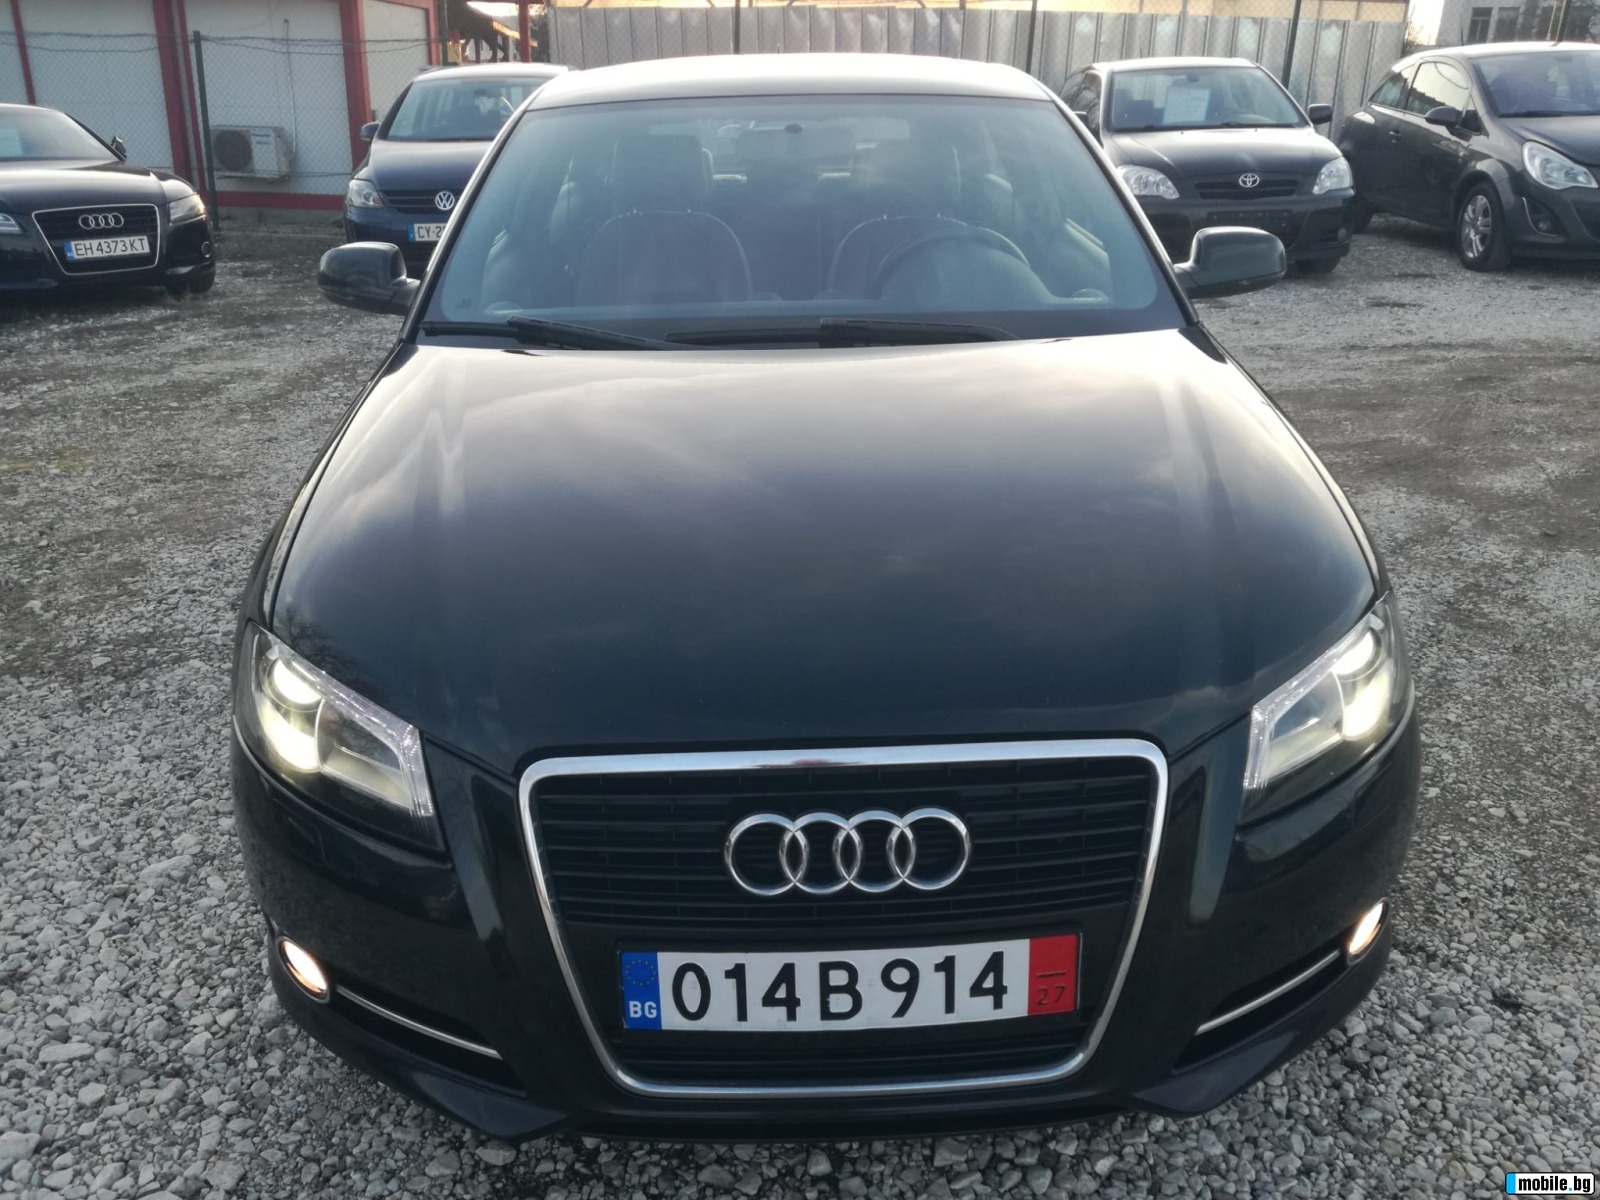 Audi A3 1.6TDI AMBITION LUXE | Mobile.bg   2